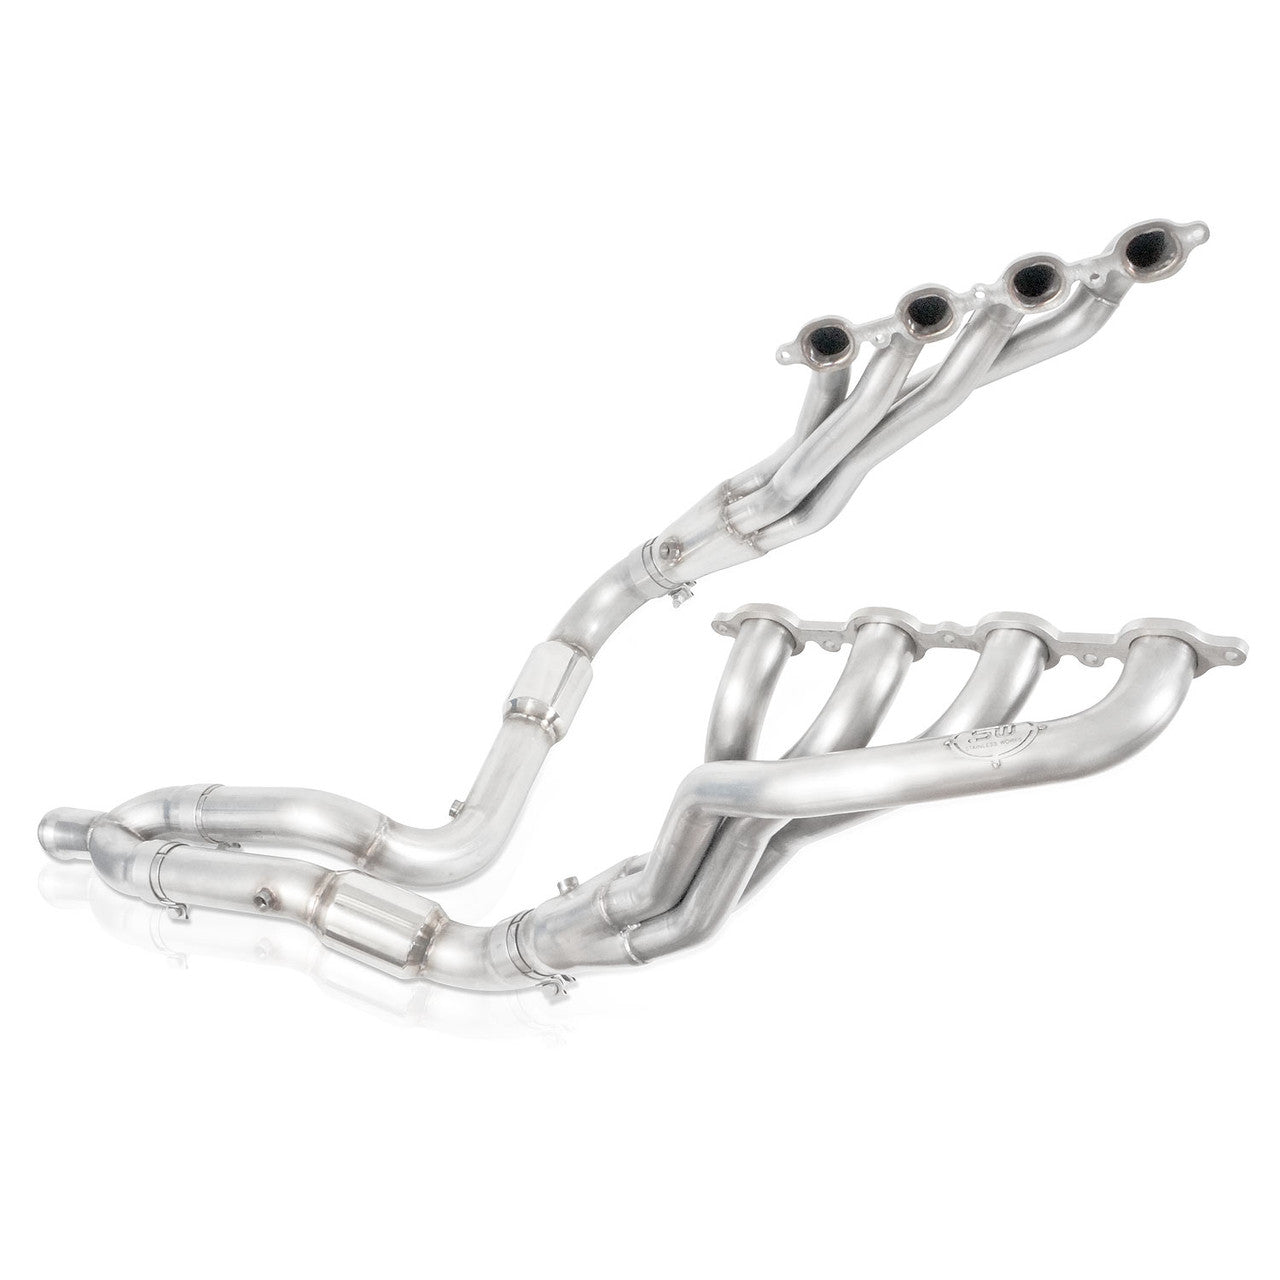 Stainless Works Stainless Steel 1-7/8" Long Tube Headers and High-Flow Catted Y-Pipe for 2019-2021 Silverado/Sierra 1500 5.3L